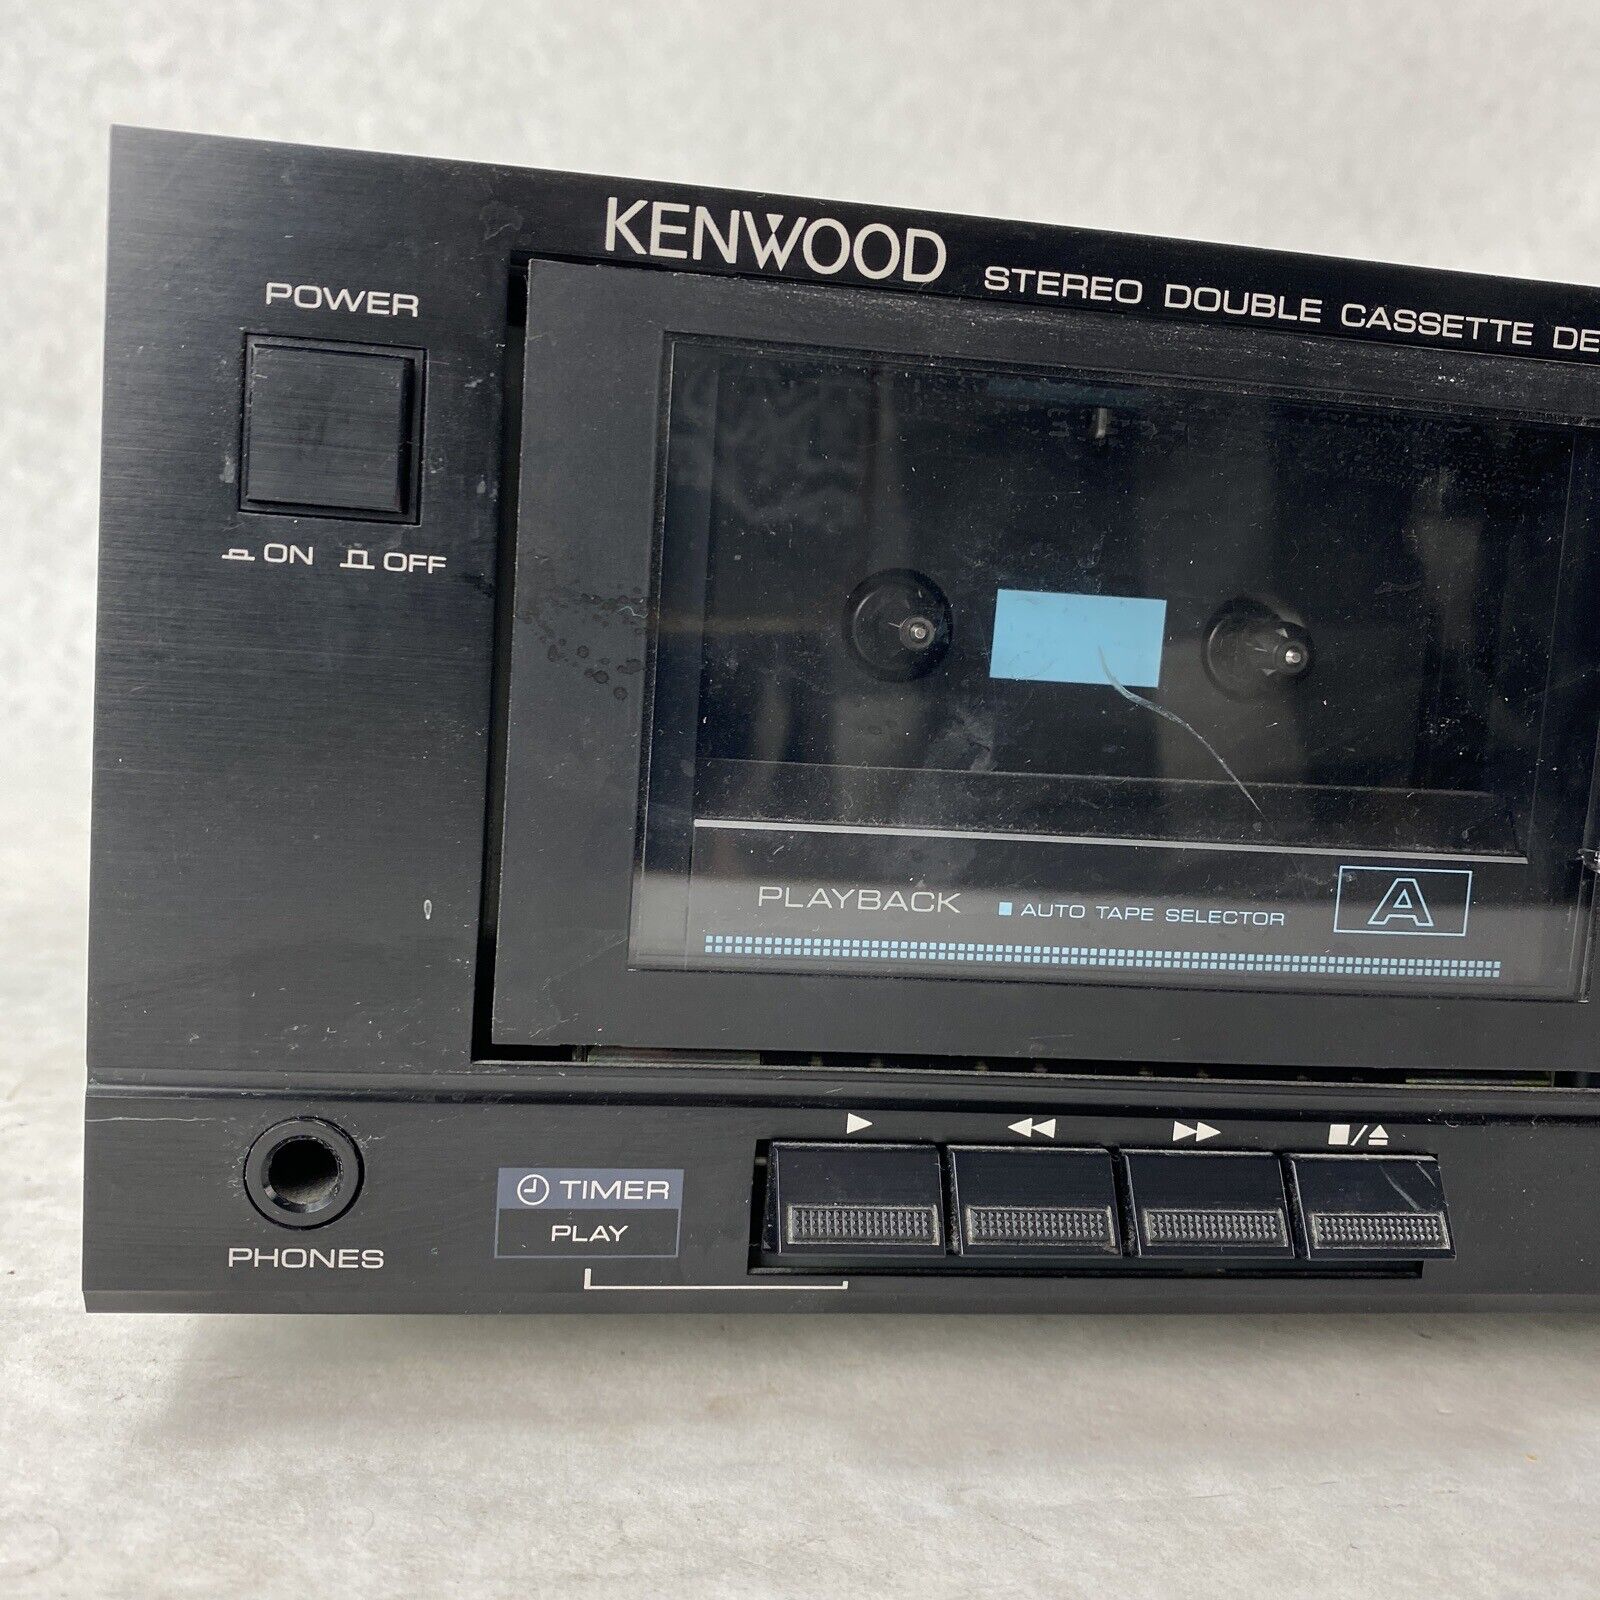 Kenwood KX-644W Dual Tape Recording Playback Stereo Double Cassette Deck PARTS